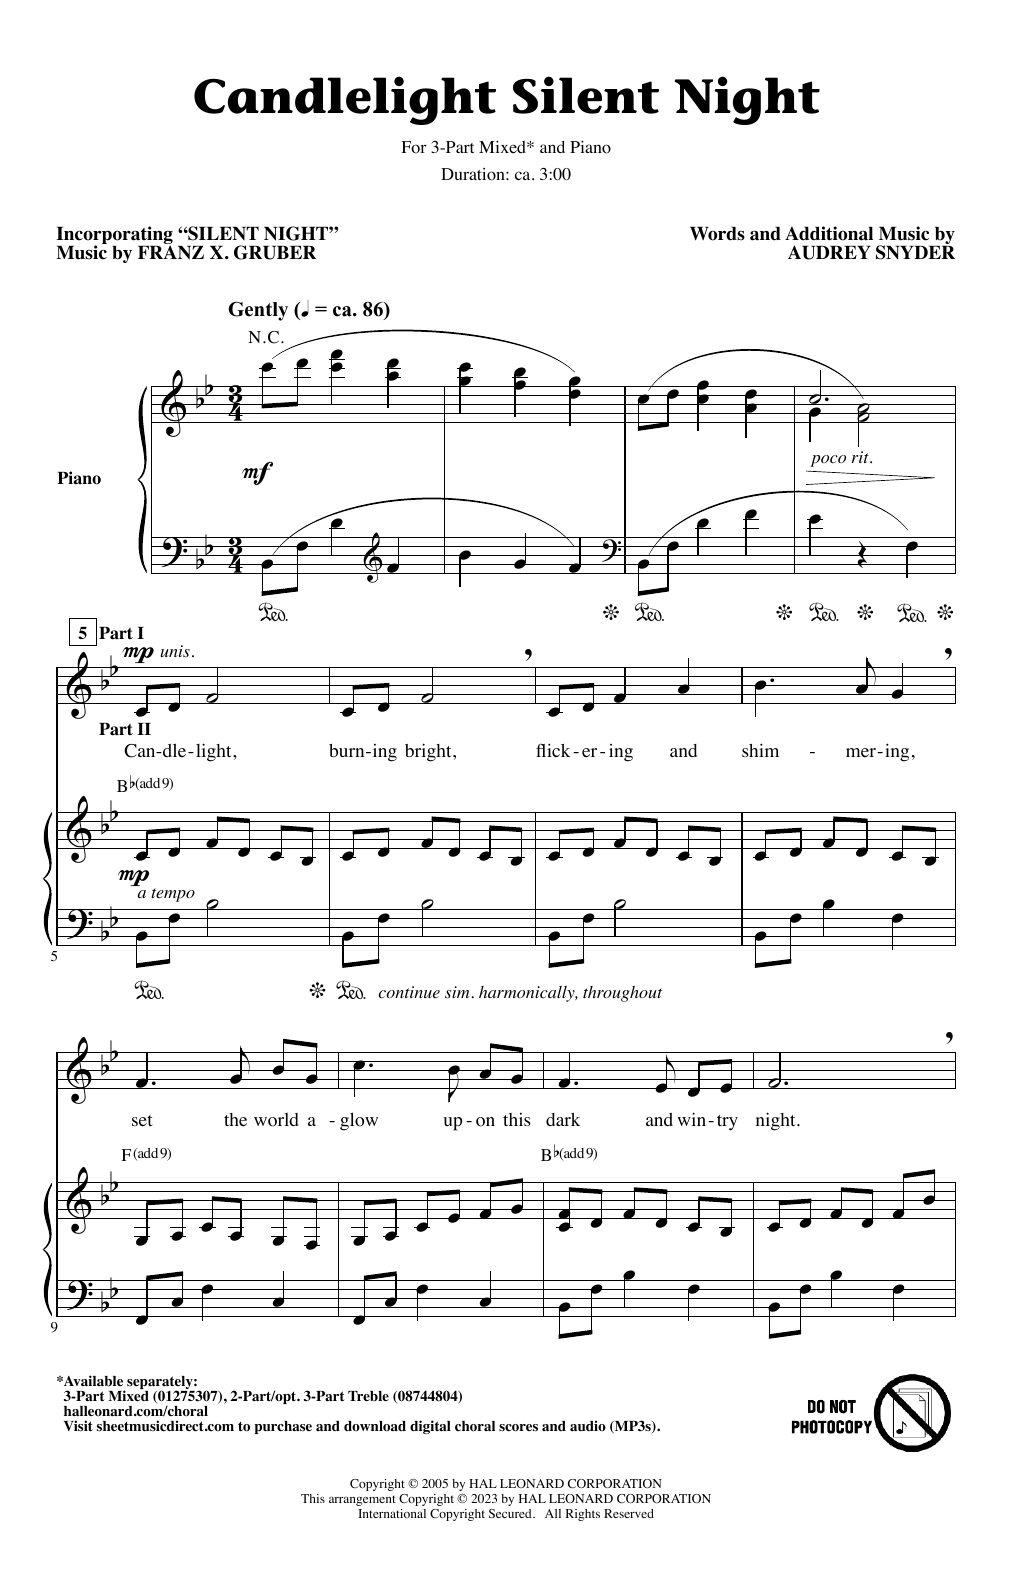 Download Audrey Snyder Candlelight Silent Night Sheet Music